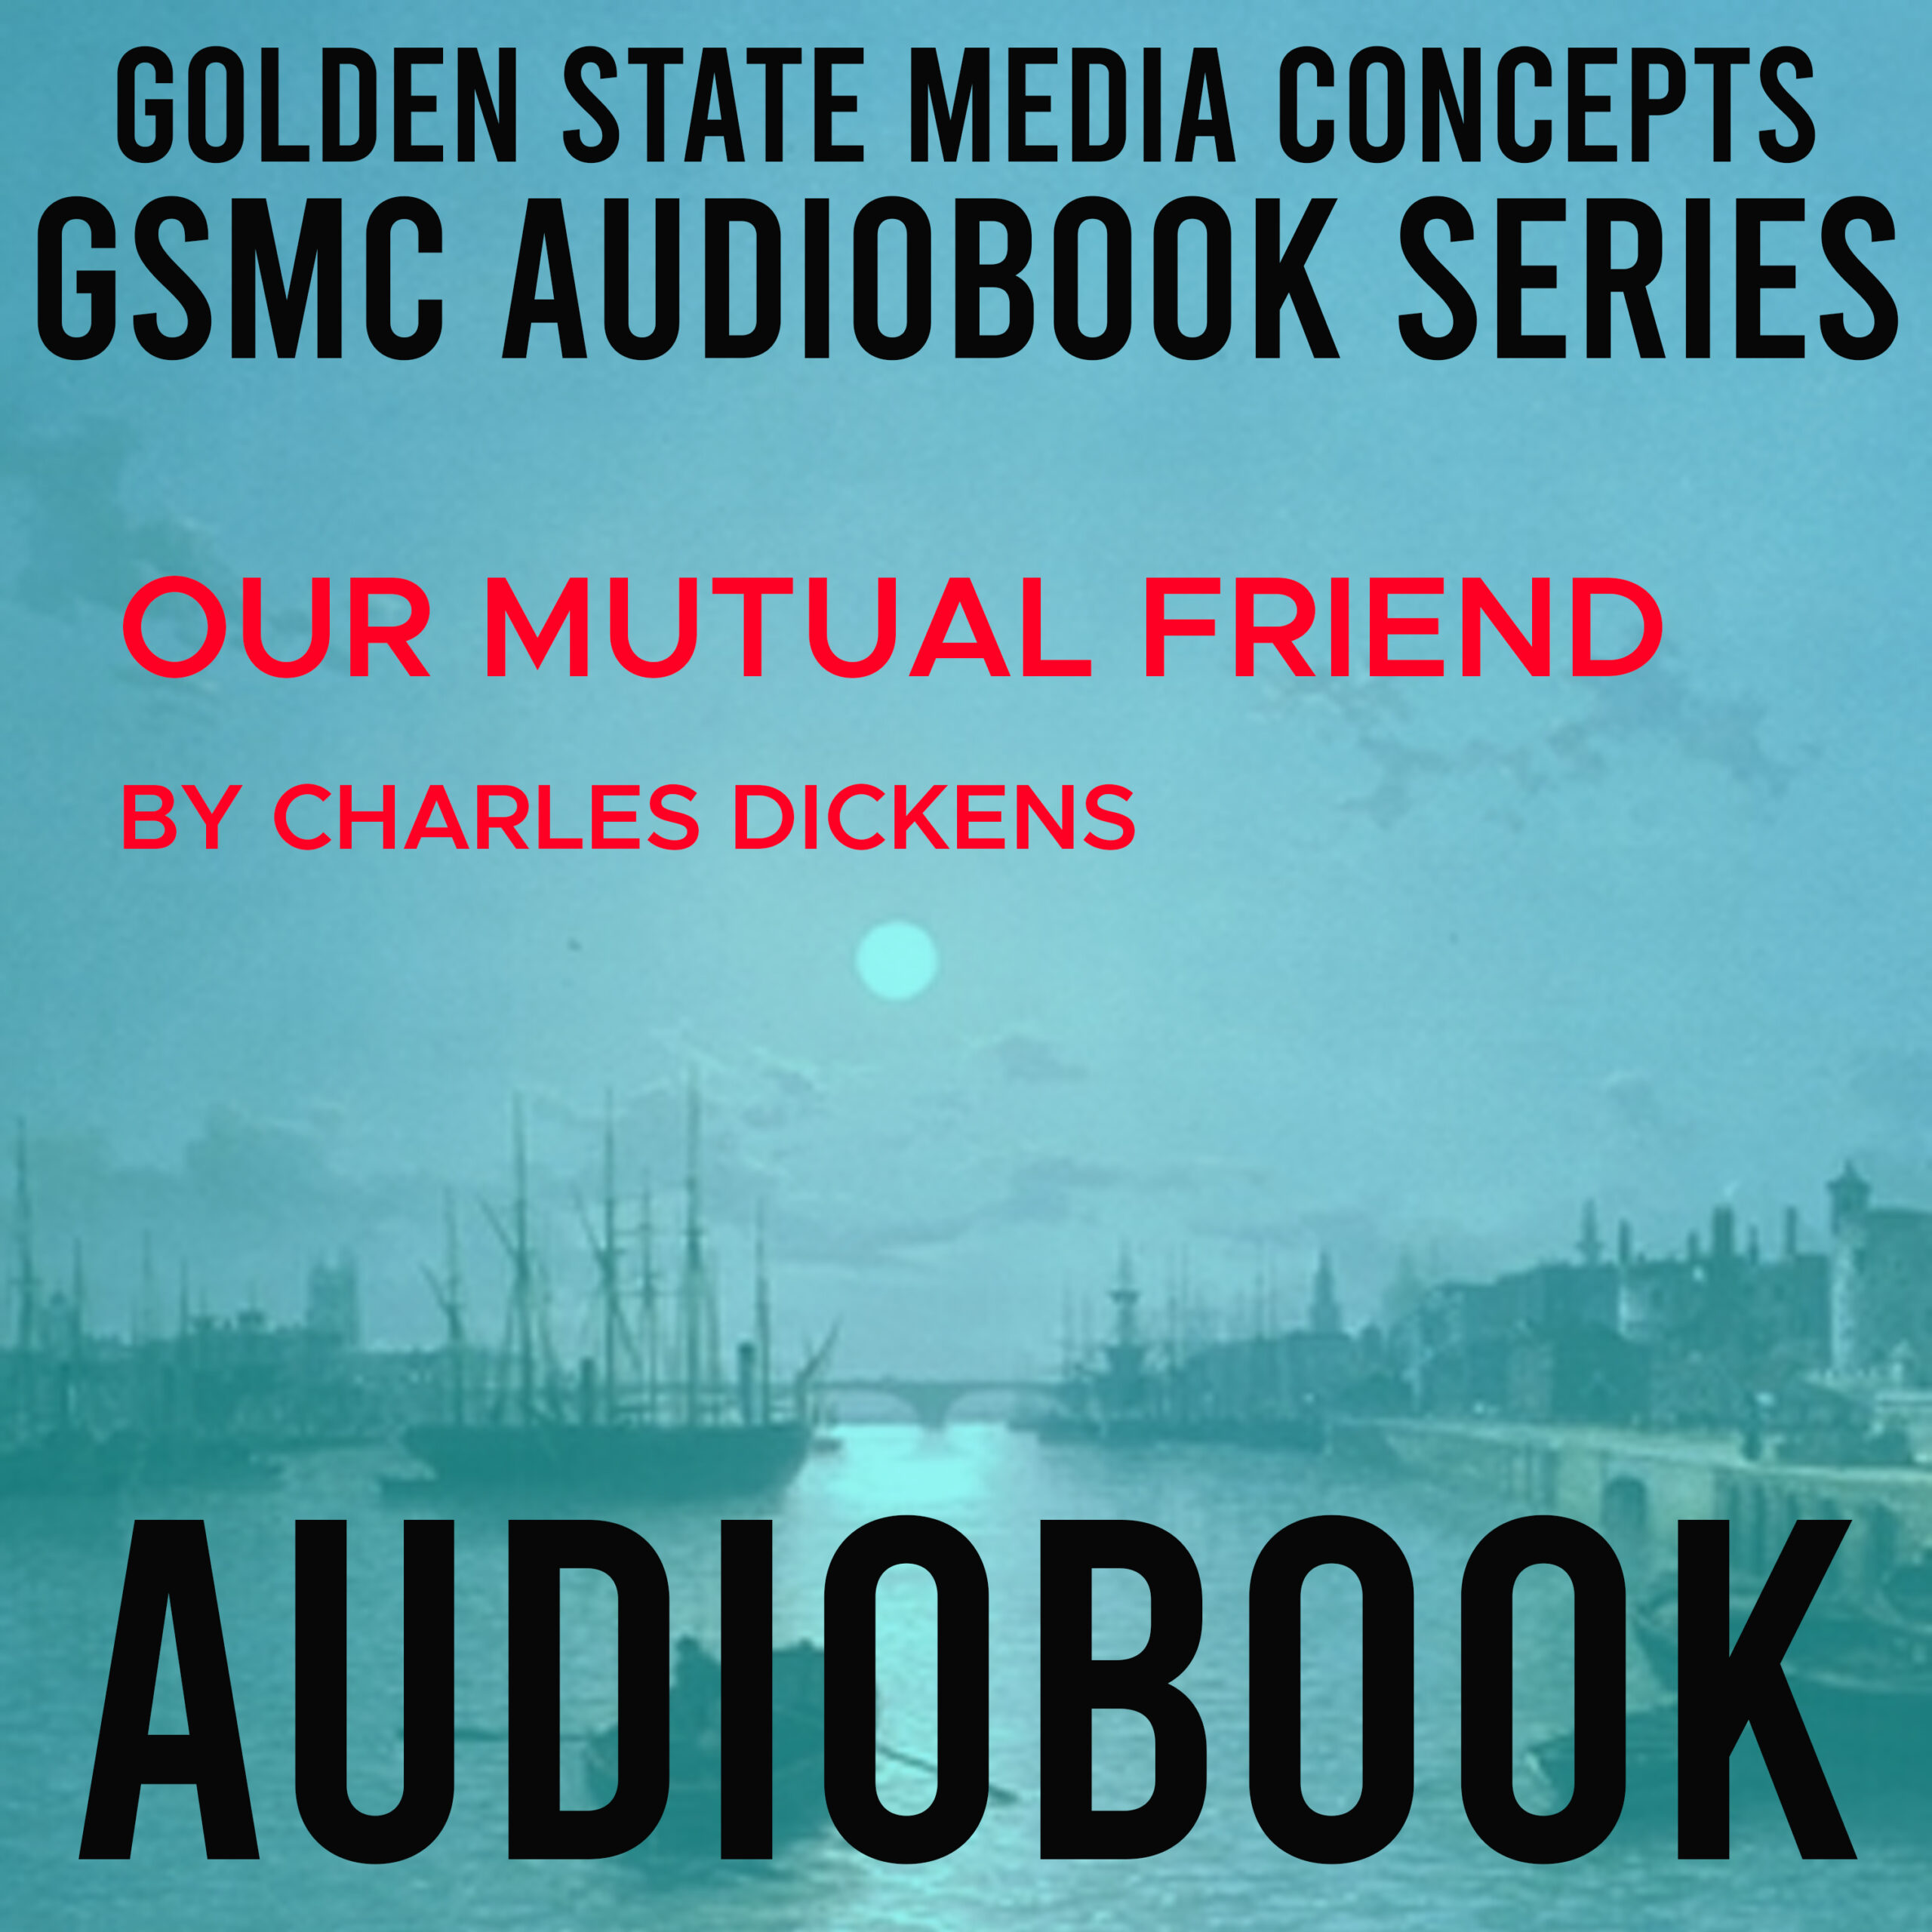 GSMC Audiobook Series: Our Mutual Friend by Charles Dickens